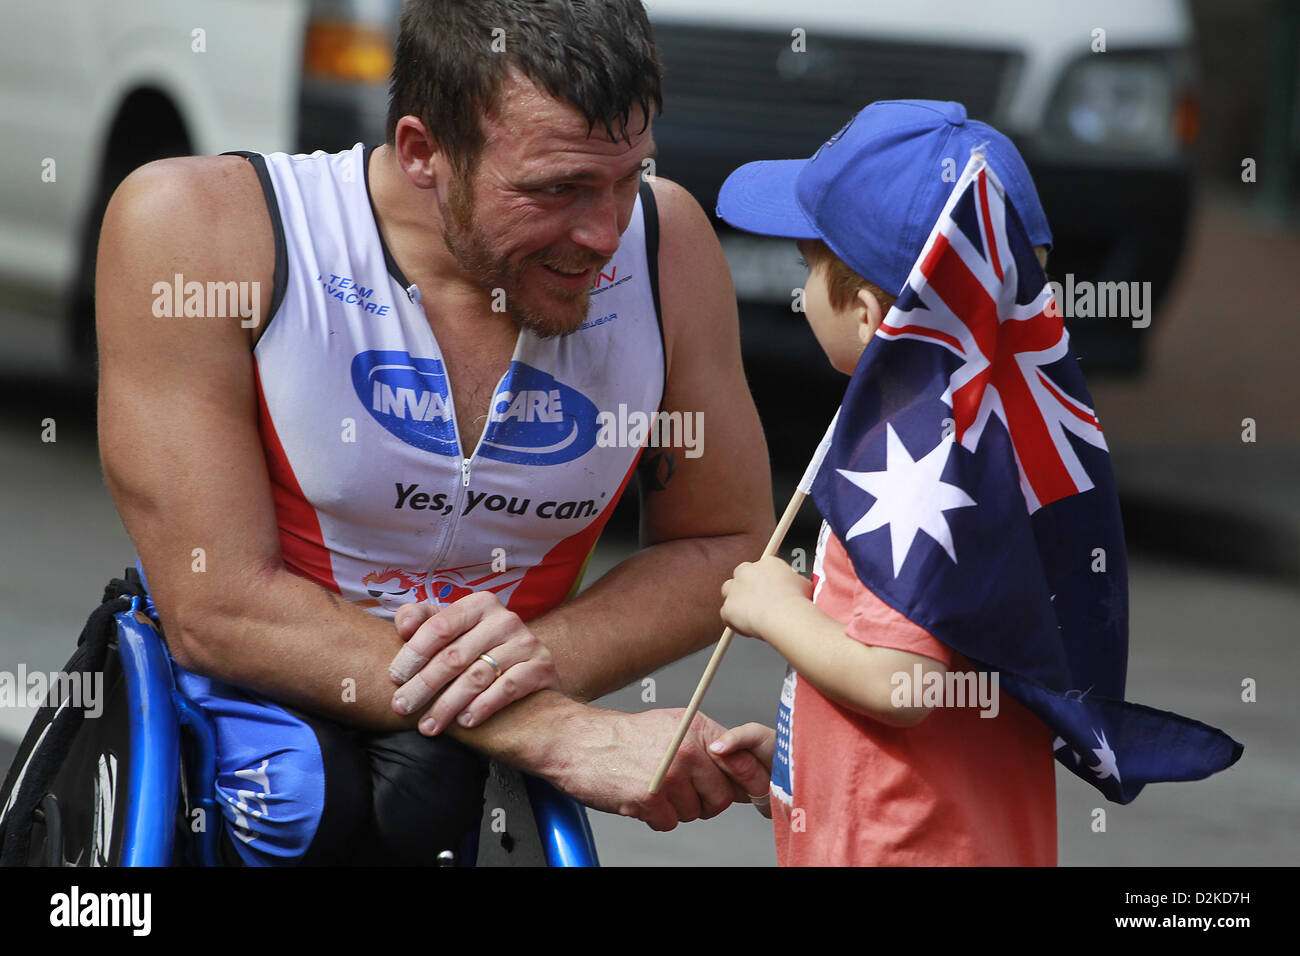 Jan. 26, 2013 - Sydney, Australia - January 26, 2013 - Sydney, Australia - London 2012 Paralympics medal winner, Kurt Fearnley, got a congratulation from his kid fans after he won the first place of GIO Oz Day 10K wheelchair race, as a part of celebrating Australia Day 2013,on January 26,2013 in Sydney, Australia. Australia Day, formerly known as Foundation Day, is the official national day of Australia and is celebrated annually on January 26 to commemorate the arrival of the first fleet to Sydney in 1788. Australia Day today is a celebration of diversity and tolerance in Australian society.  Stock Photo